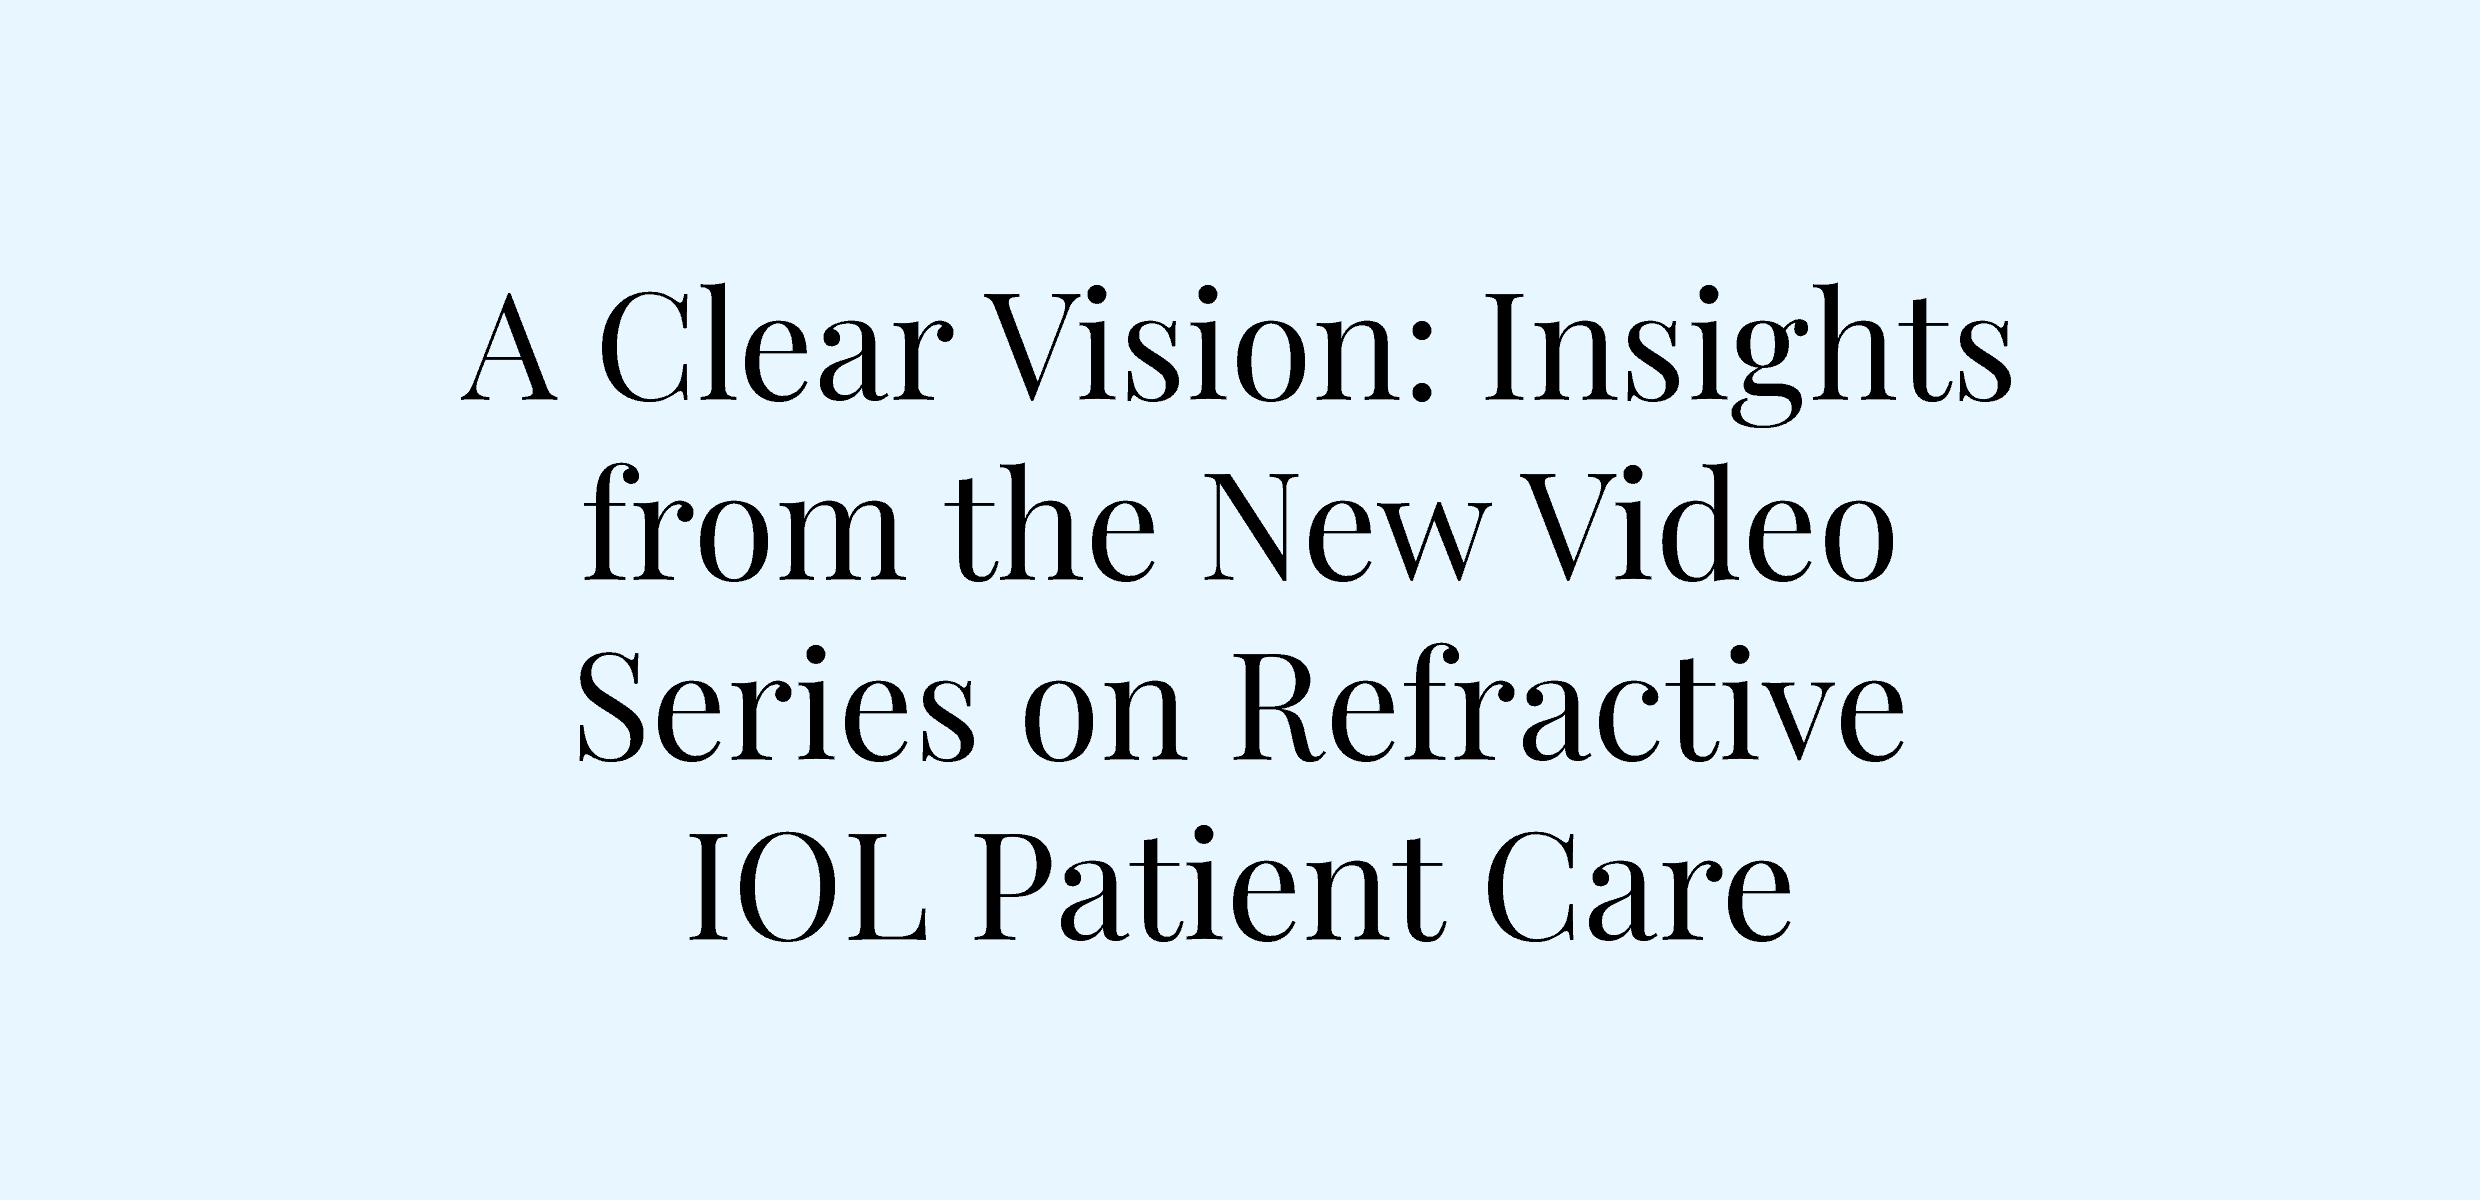 A Clear Vision: Insights from the New Video Series on Refractive IOL Patient Care